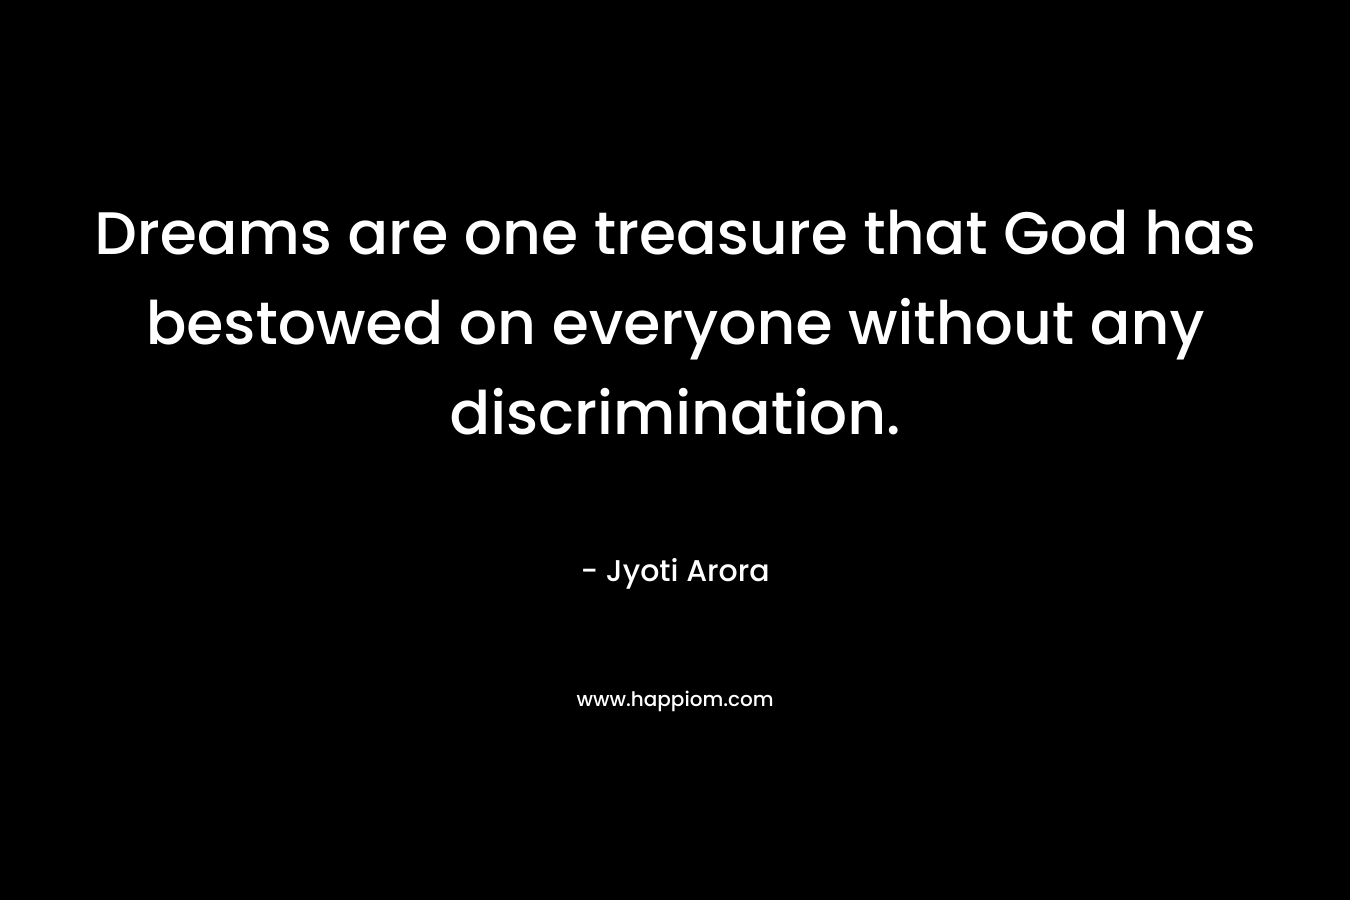 Dreams are one treasure that God has bestowed on everyone without any discrimination.